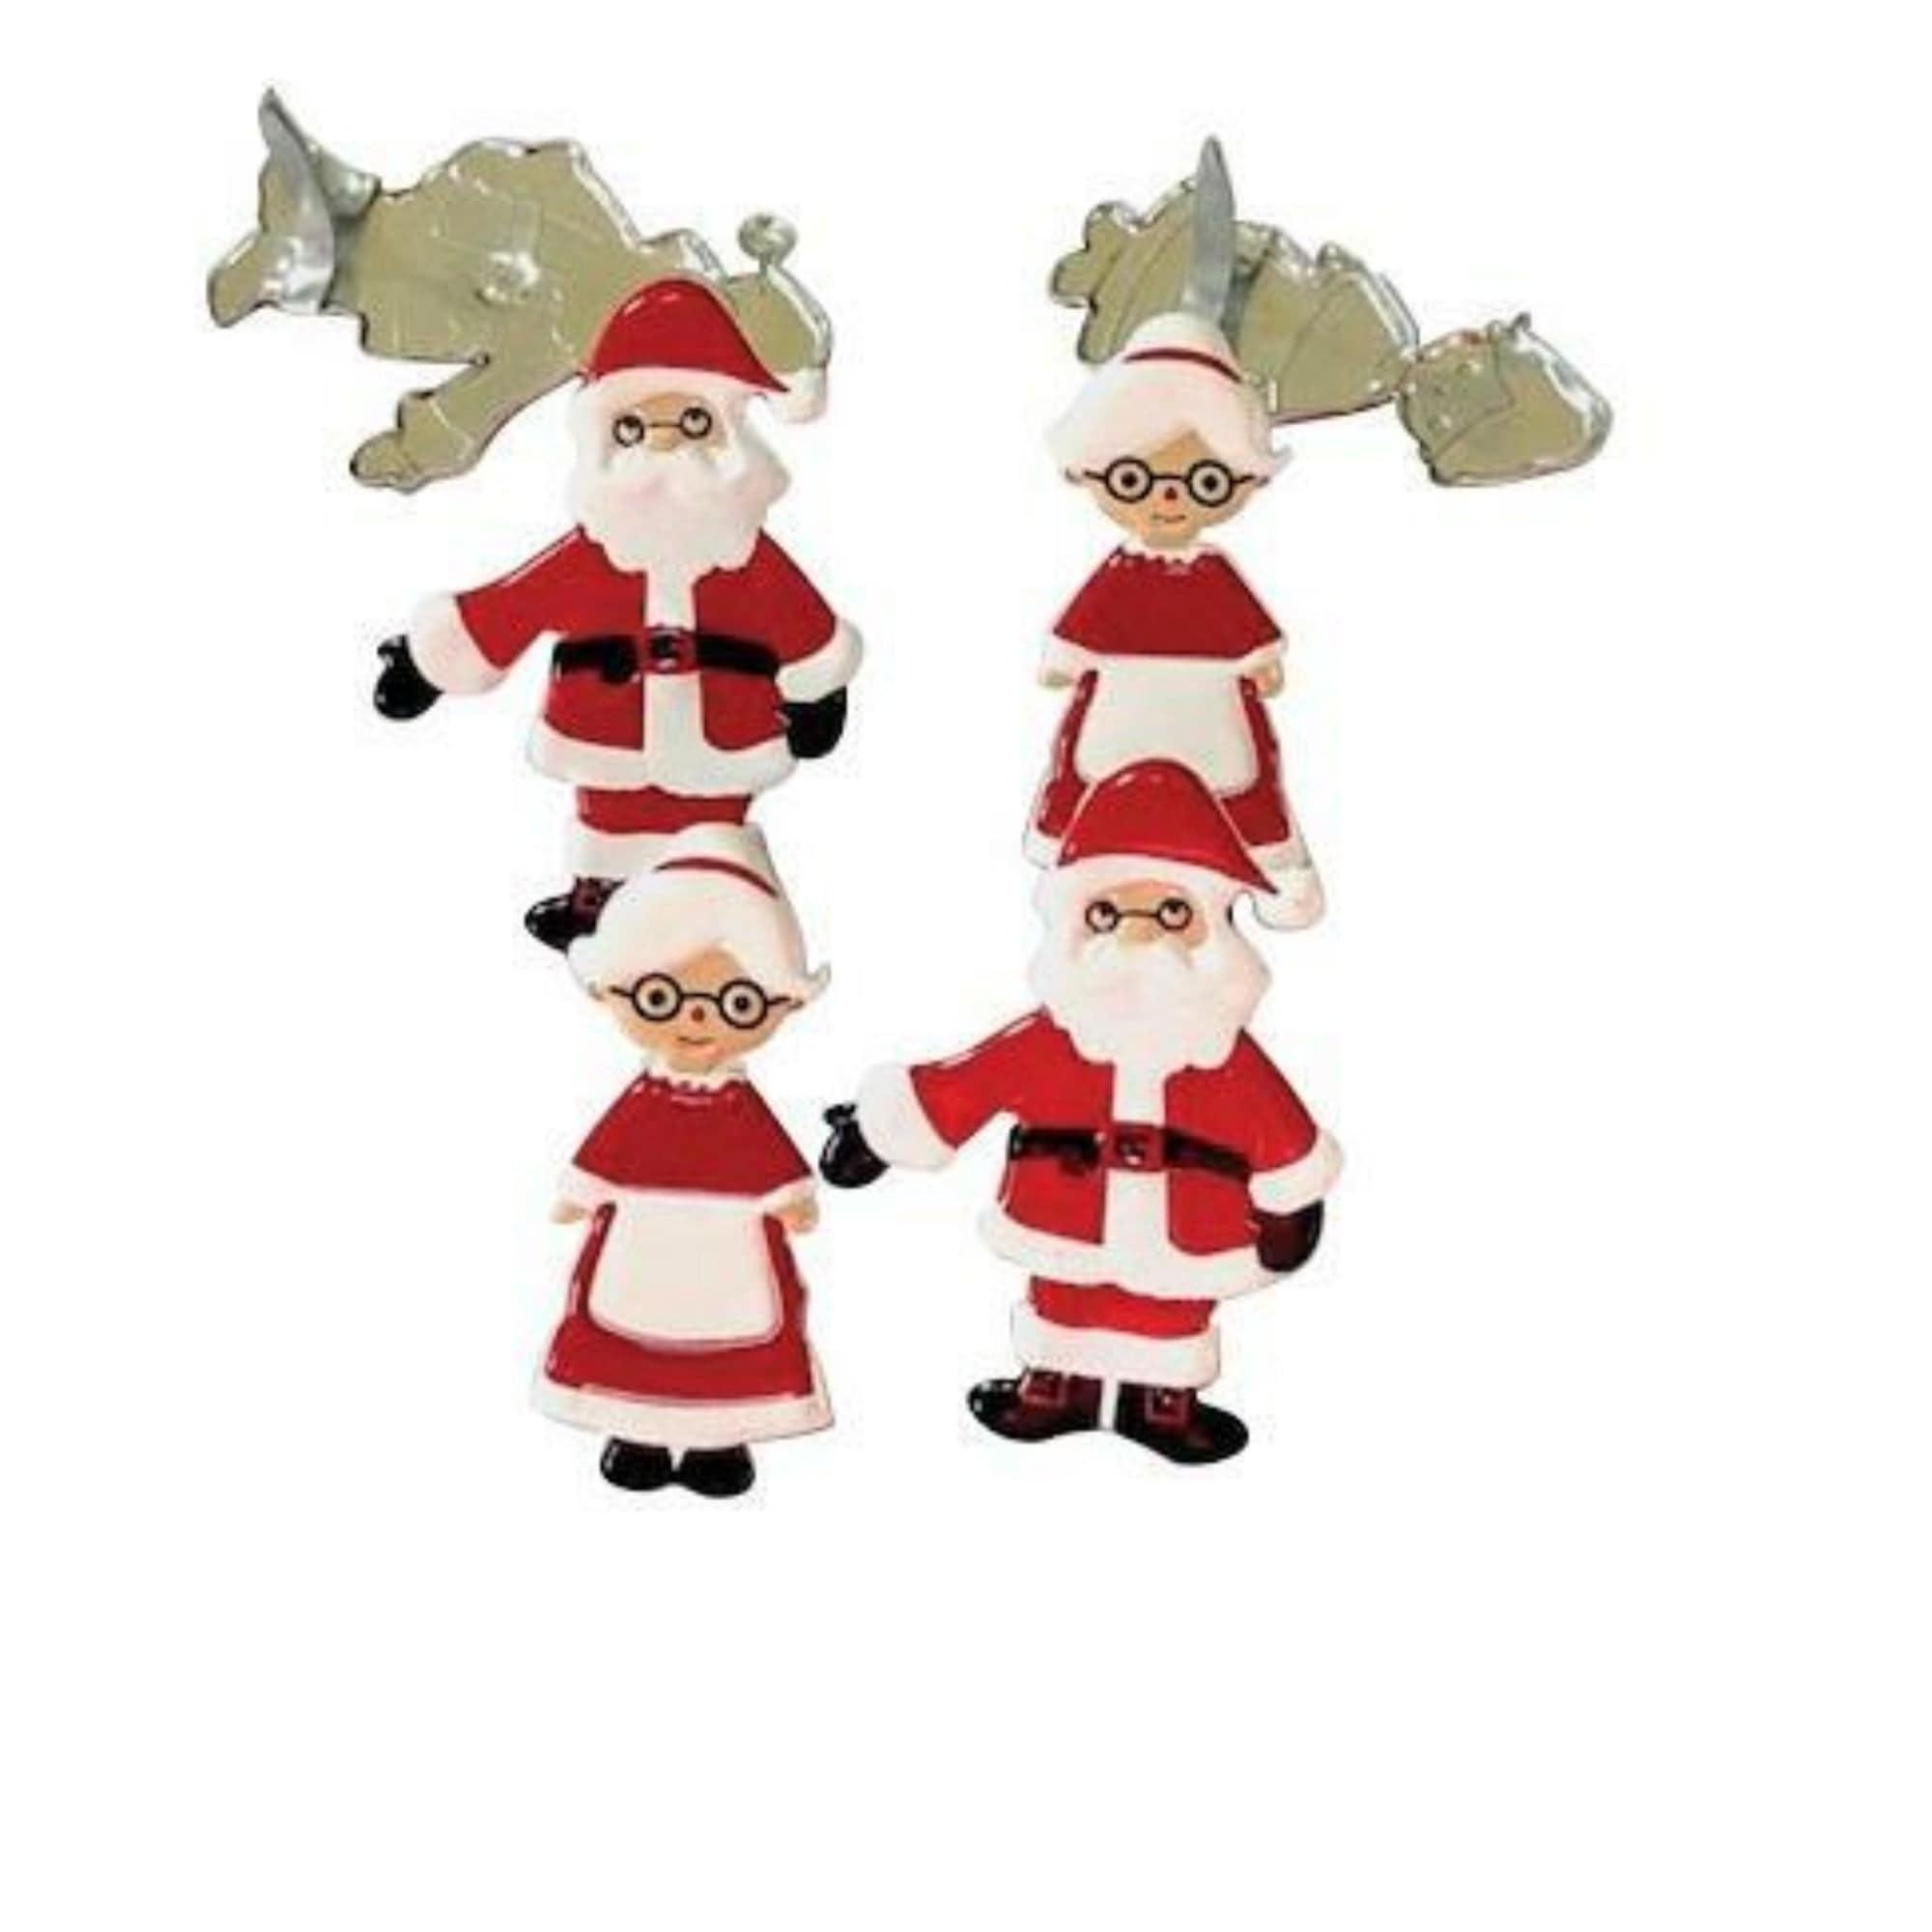 Mr. & Mrs. Santa Claus Christmas Brads by Eyelet Outlet - Pkg. of 12